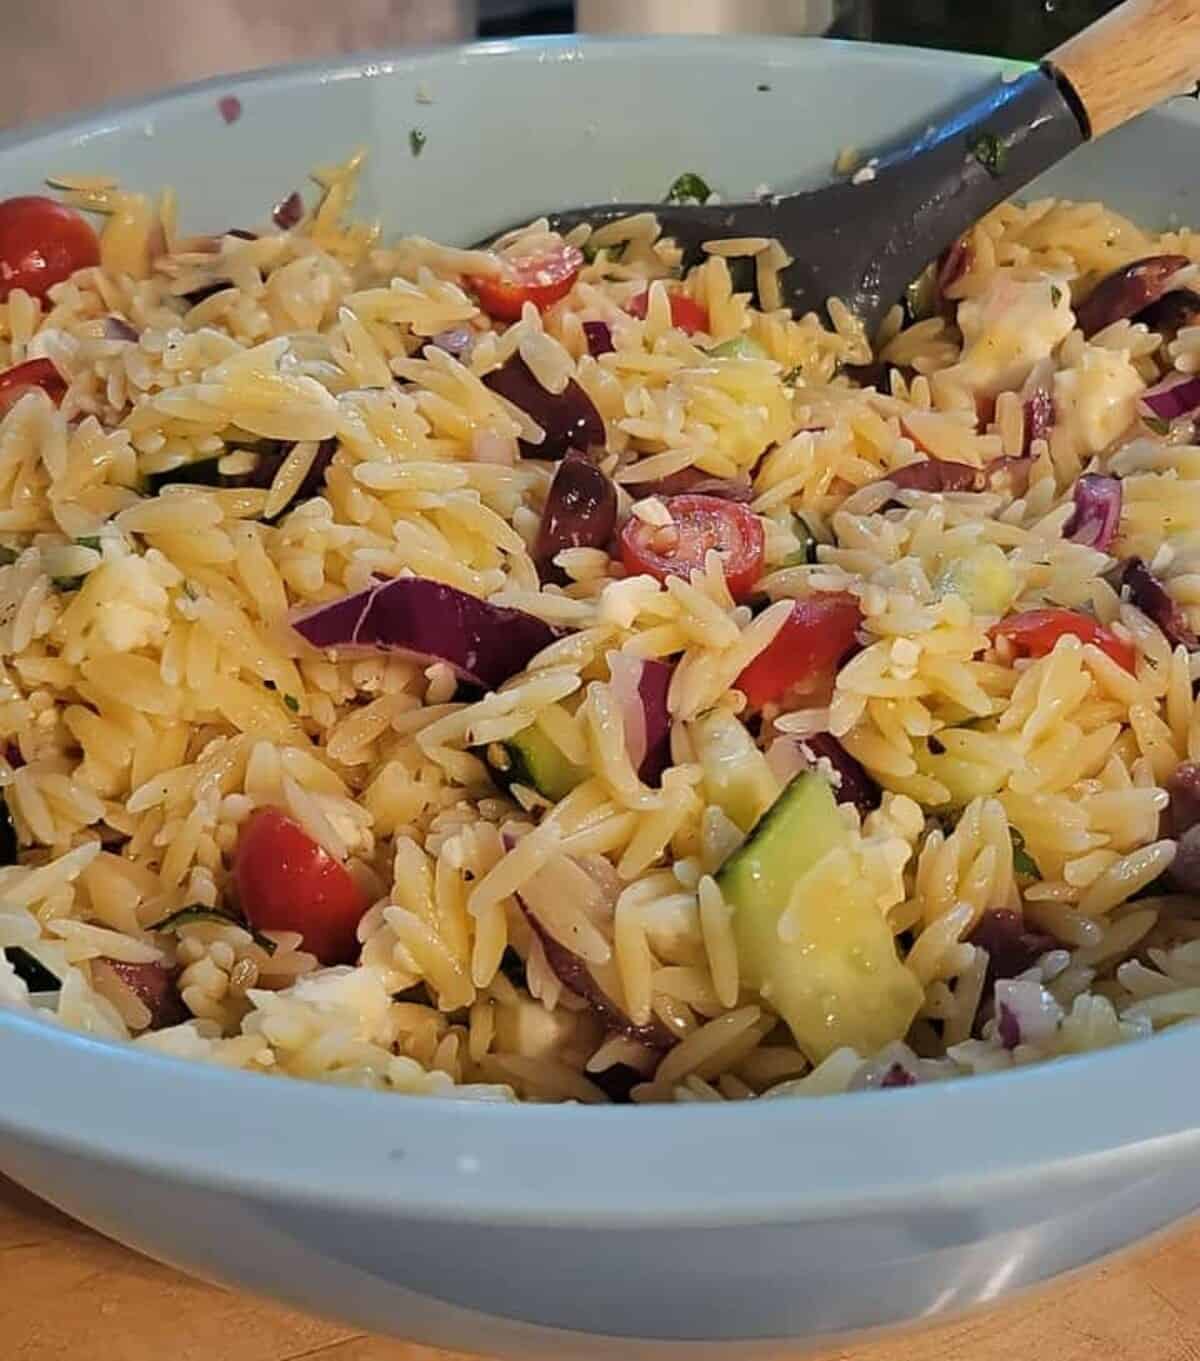 orzo salad being mixed together with a spoon in a mixing bowl.